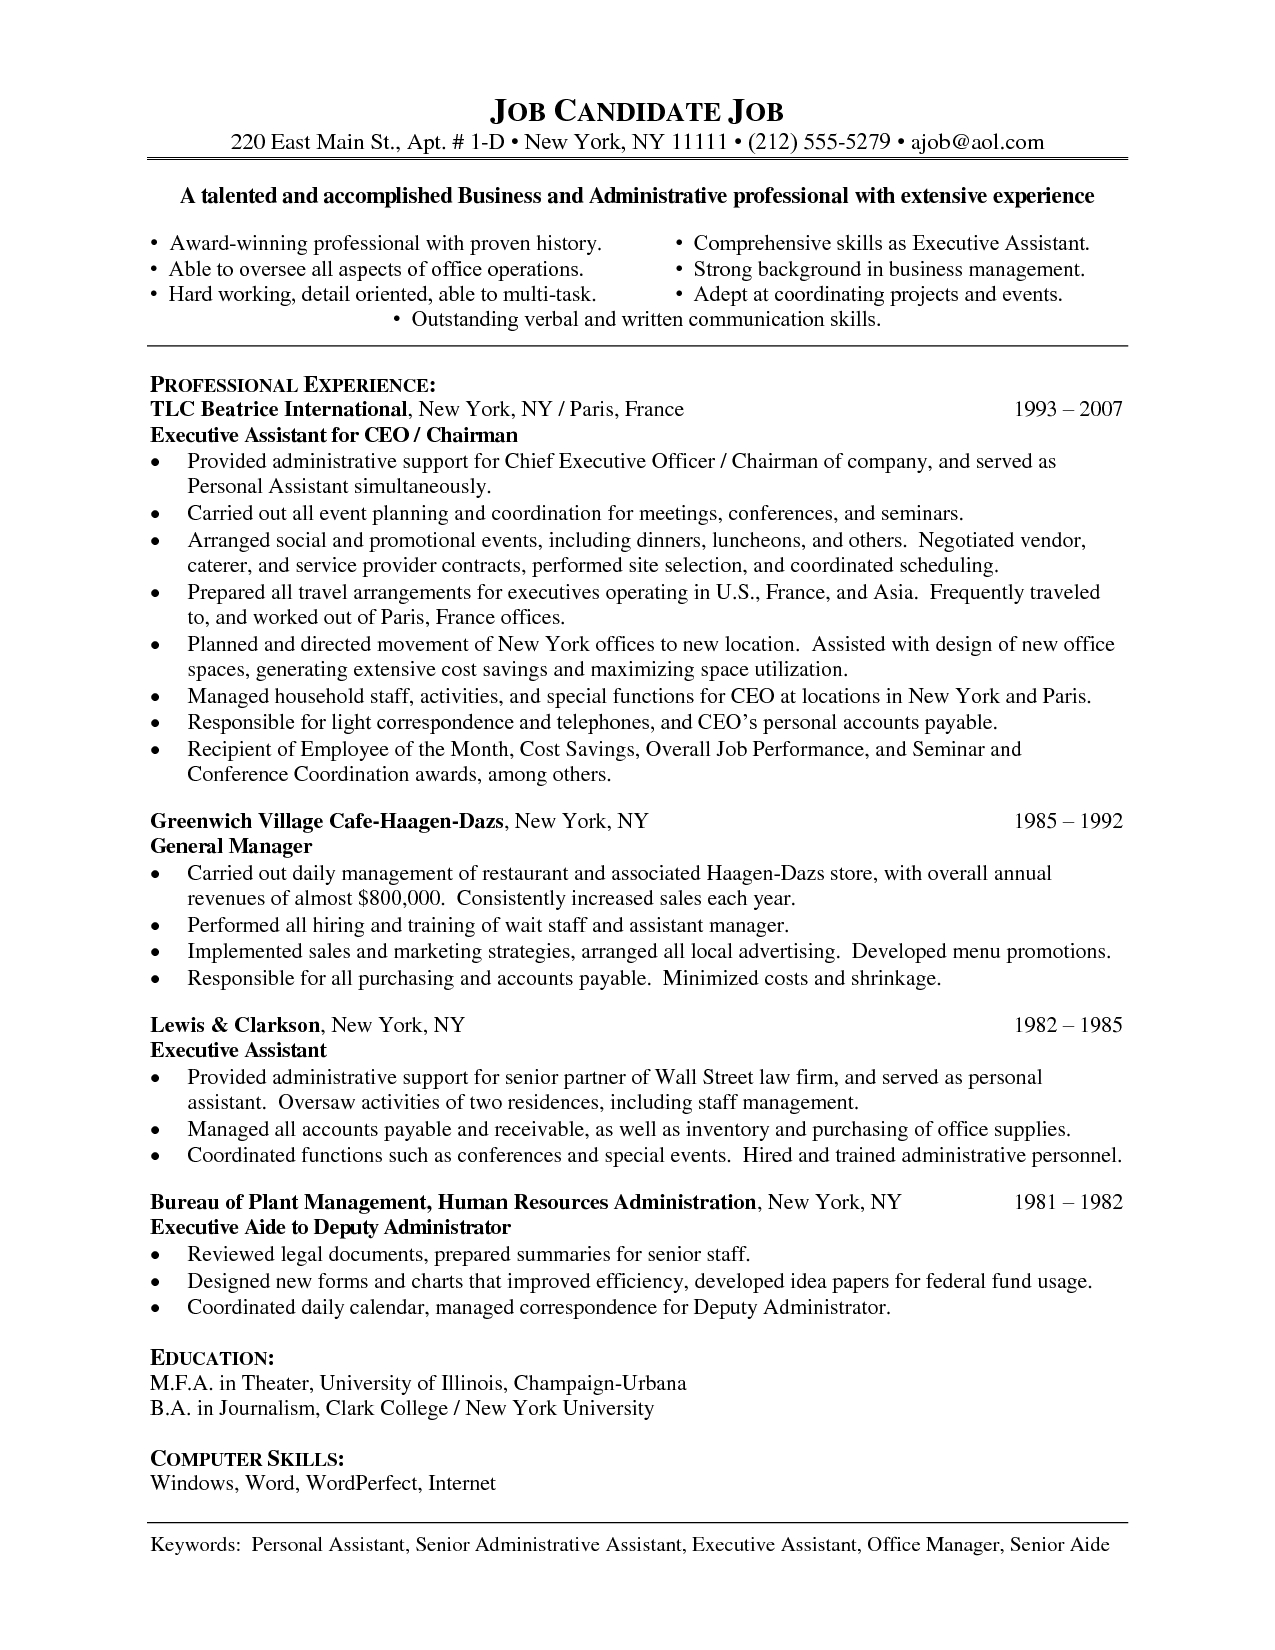 Resume Examples Office  Admin Resumes Templates Sample Resume For Office Managermedical